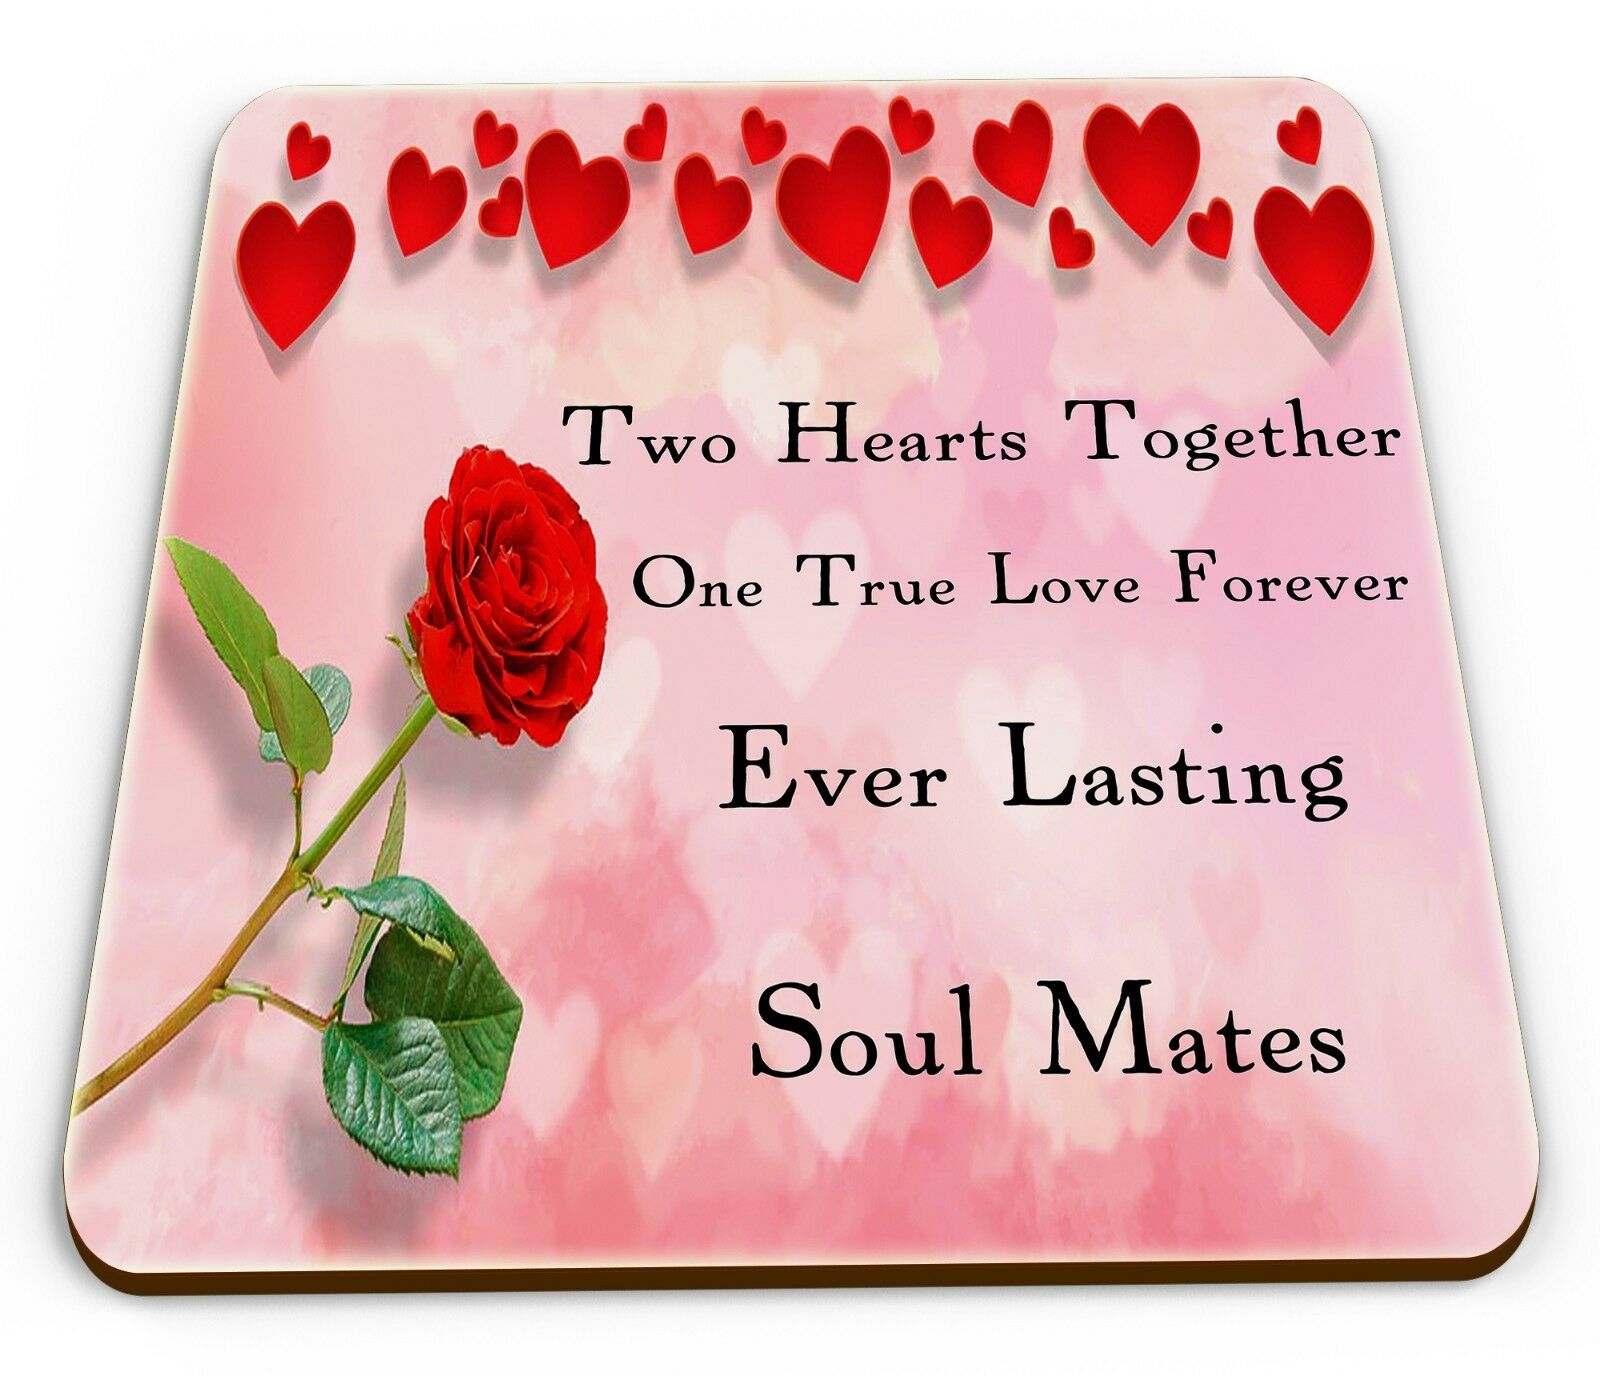 Two Hearts Together One True love Forever Ever Lasting Soul Mates Coaster